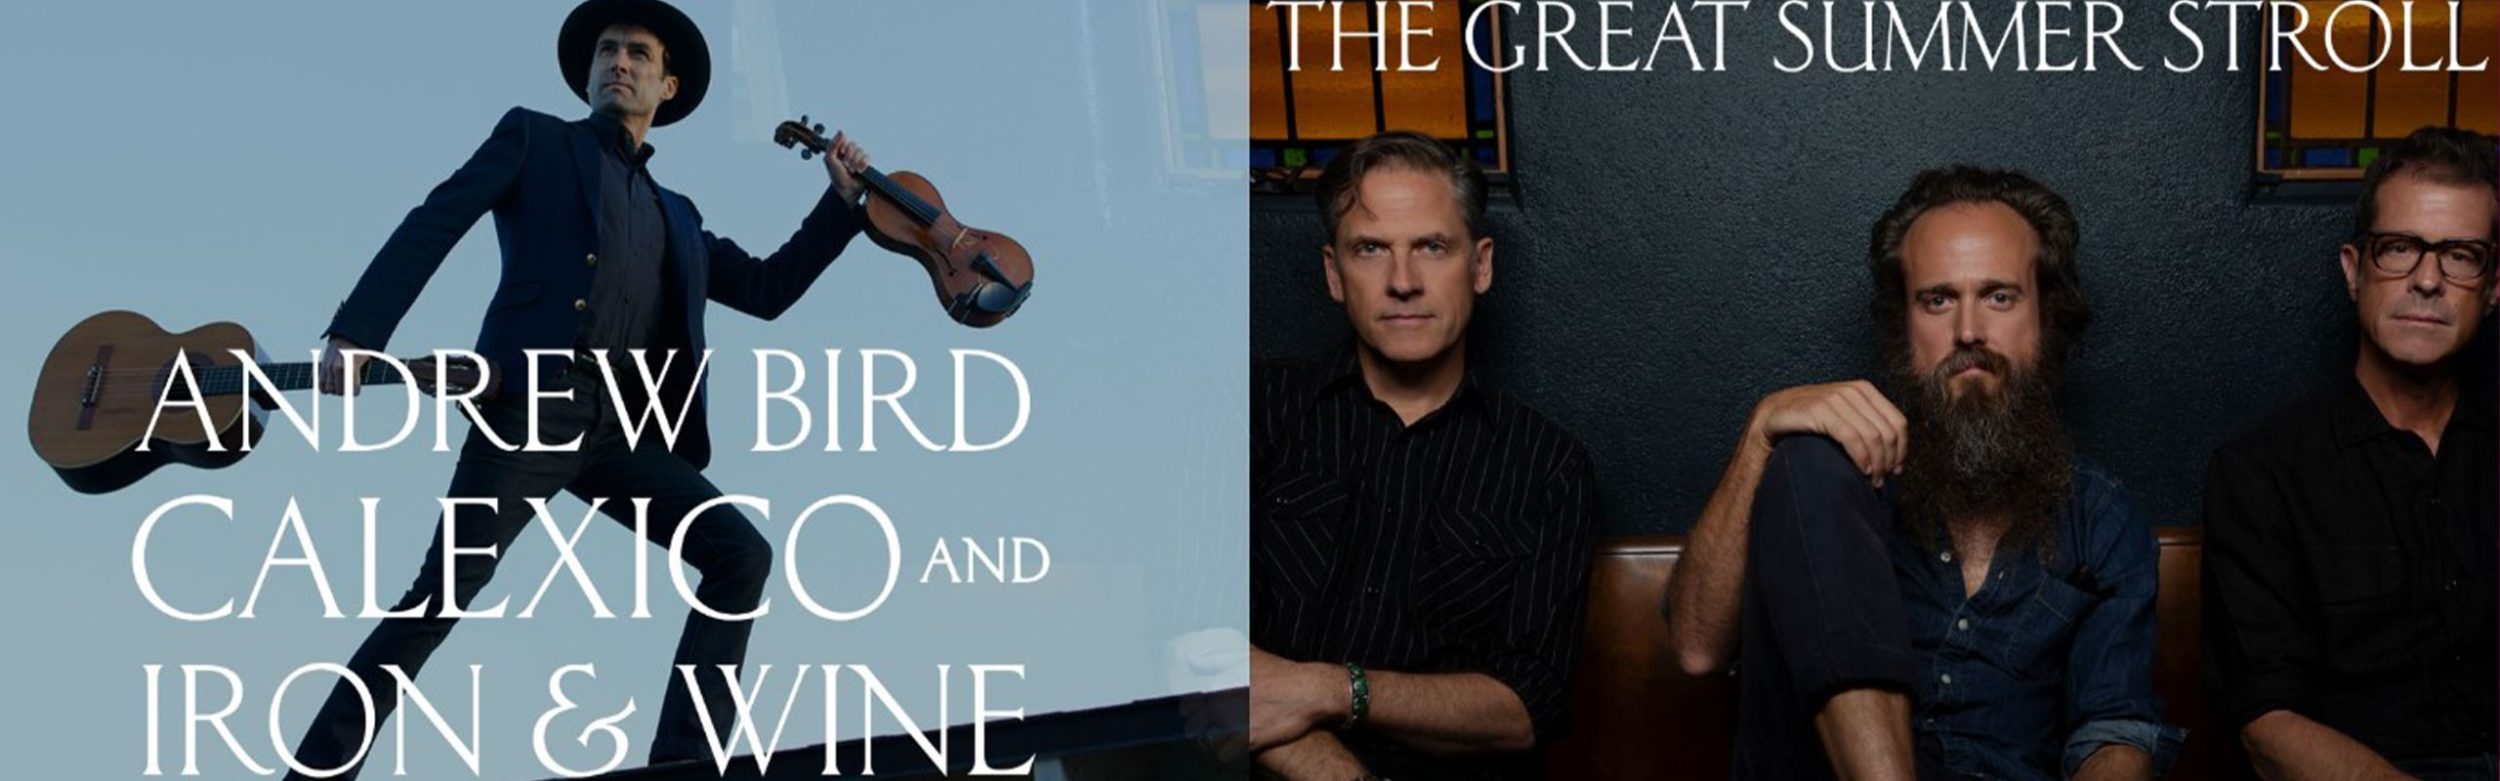 Andrew Bird and Calexico and Iron & Wine: The Great Summer Stroll